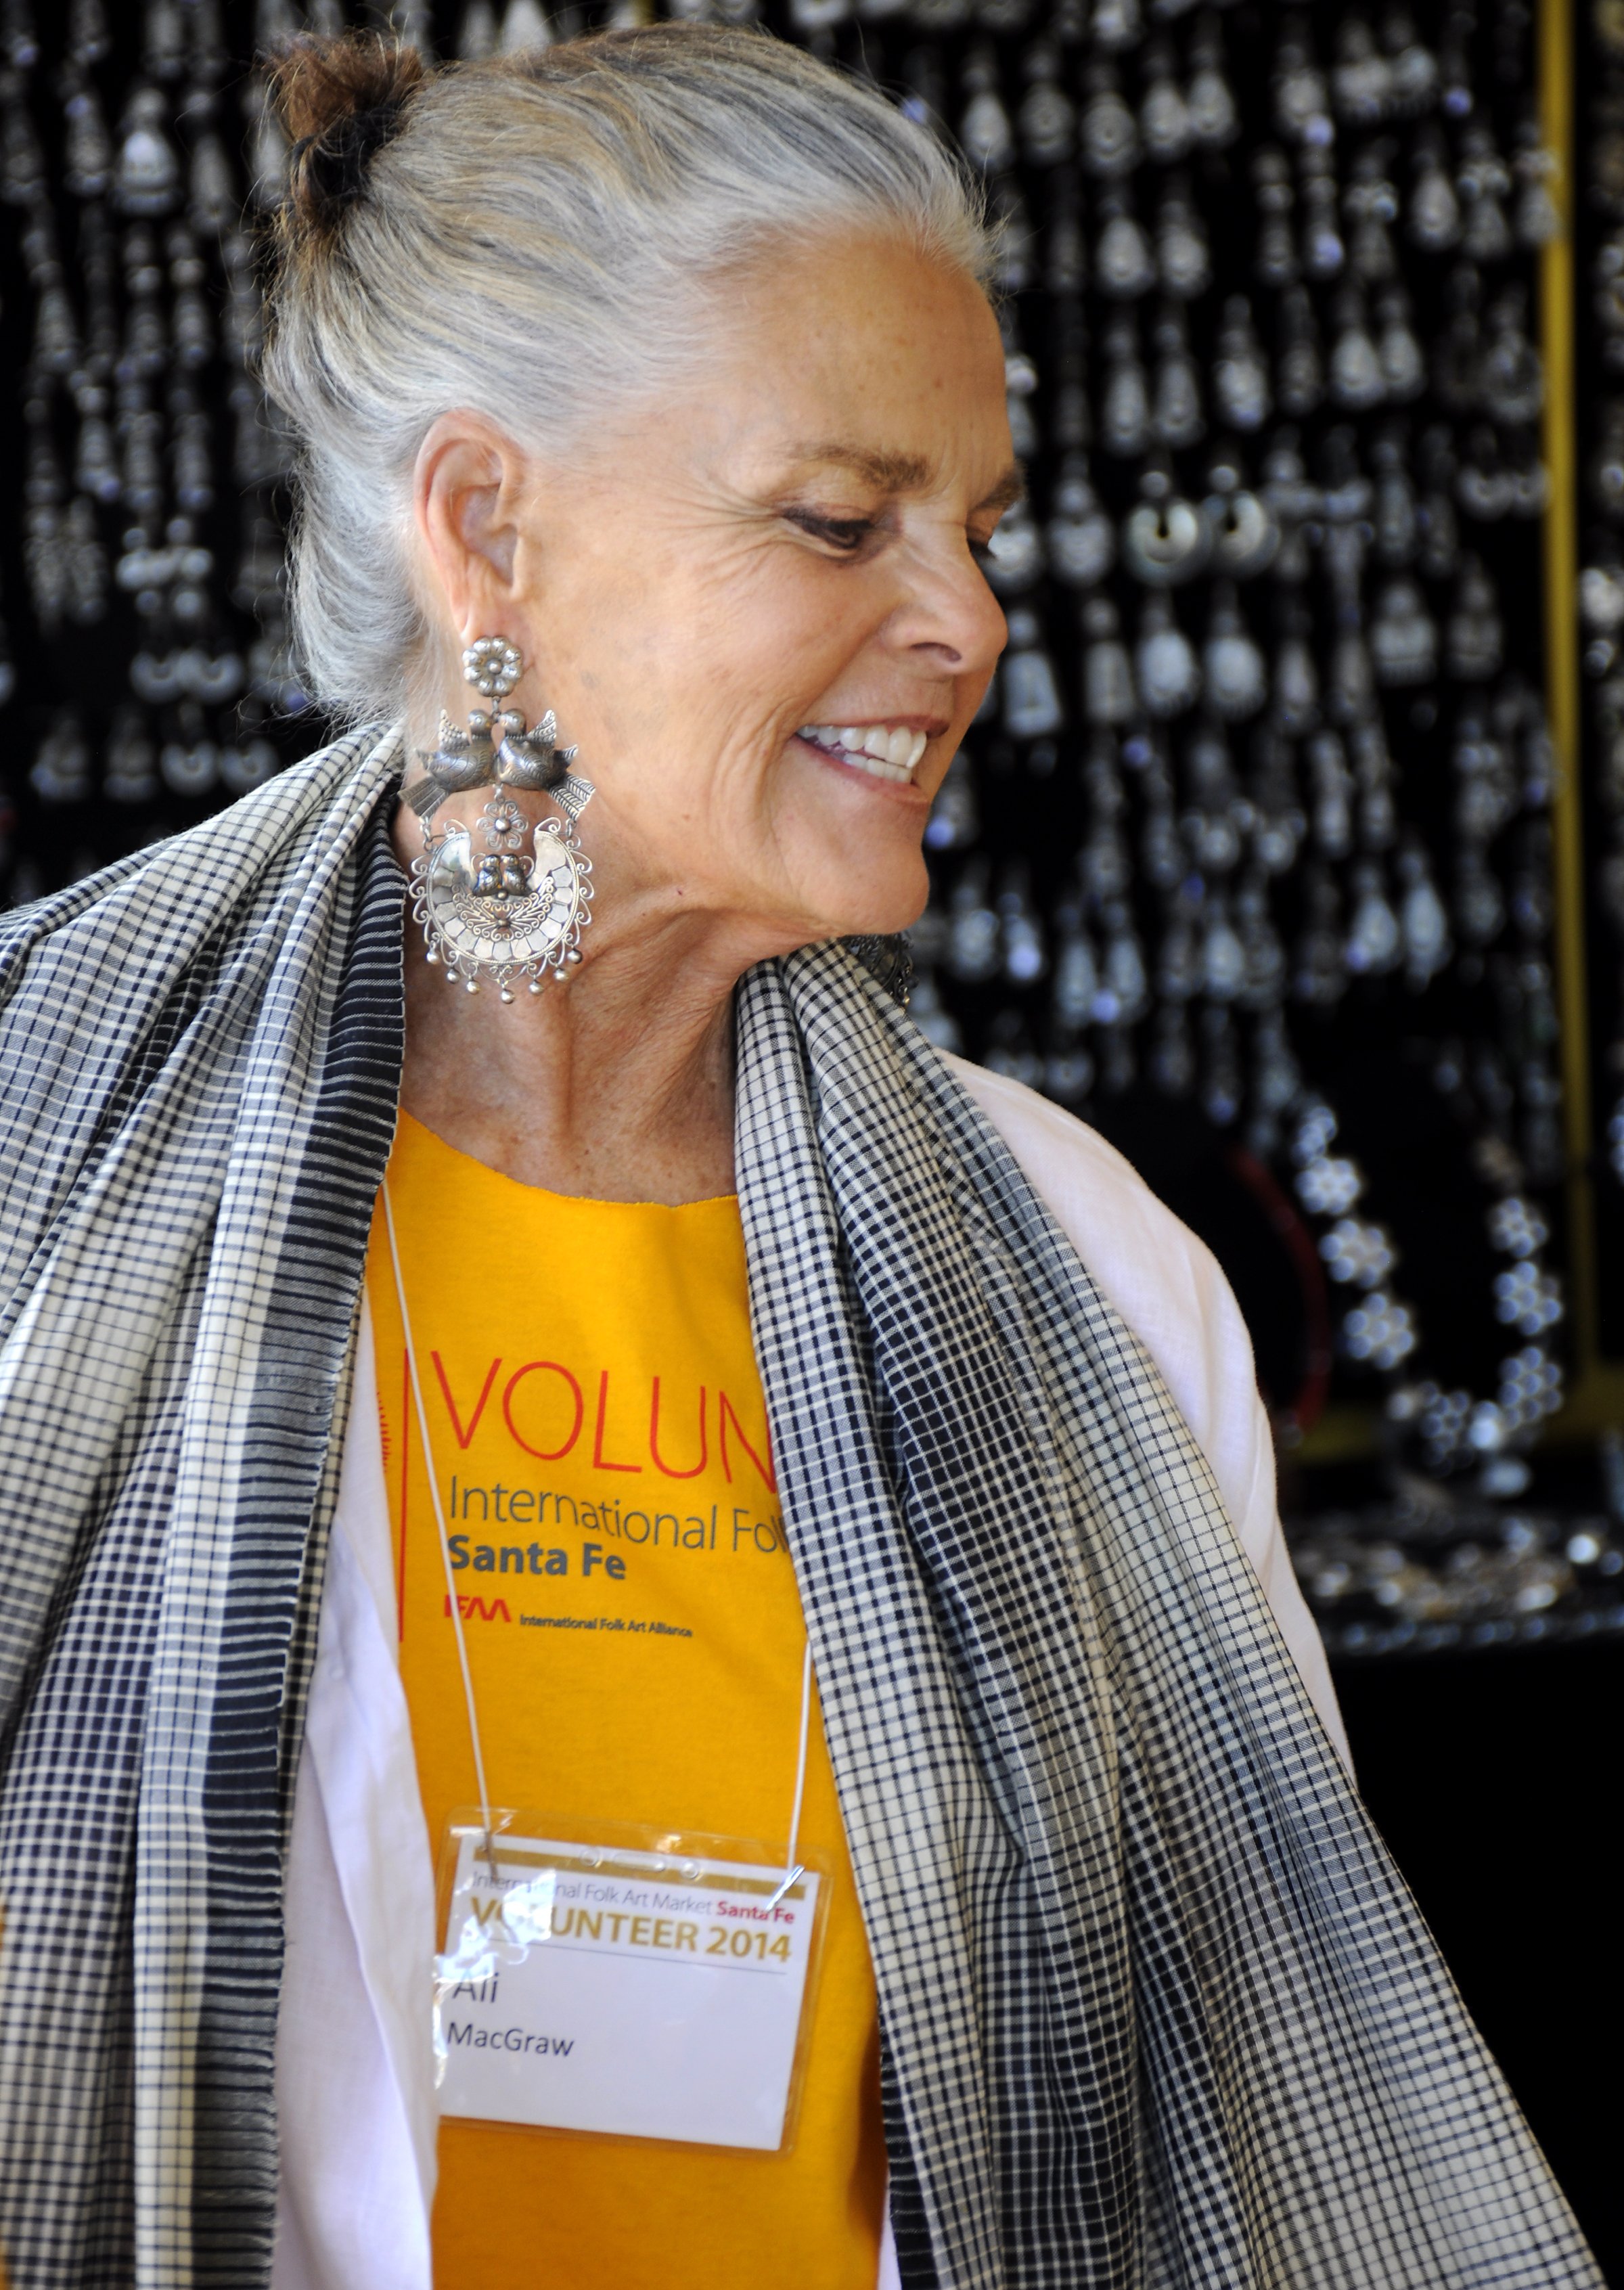 Ali MacGraw working as a volunteer at the annual International Folk Art Market in Santa Fe, New Mexico. | Source: Robert Alexander/Getty Images